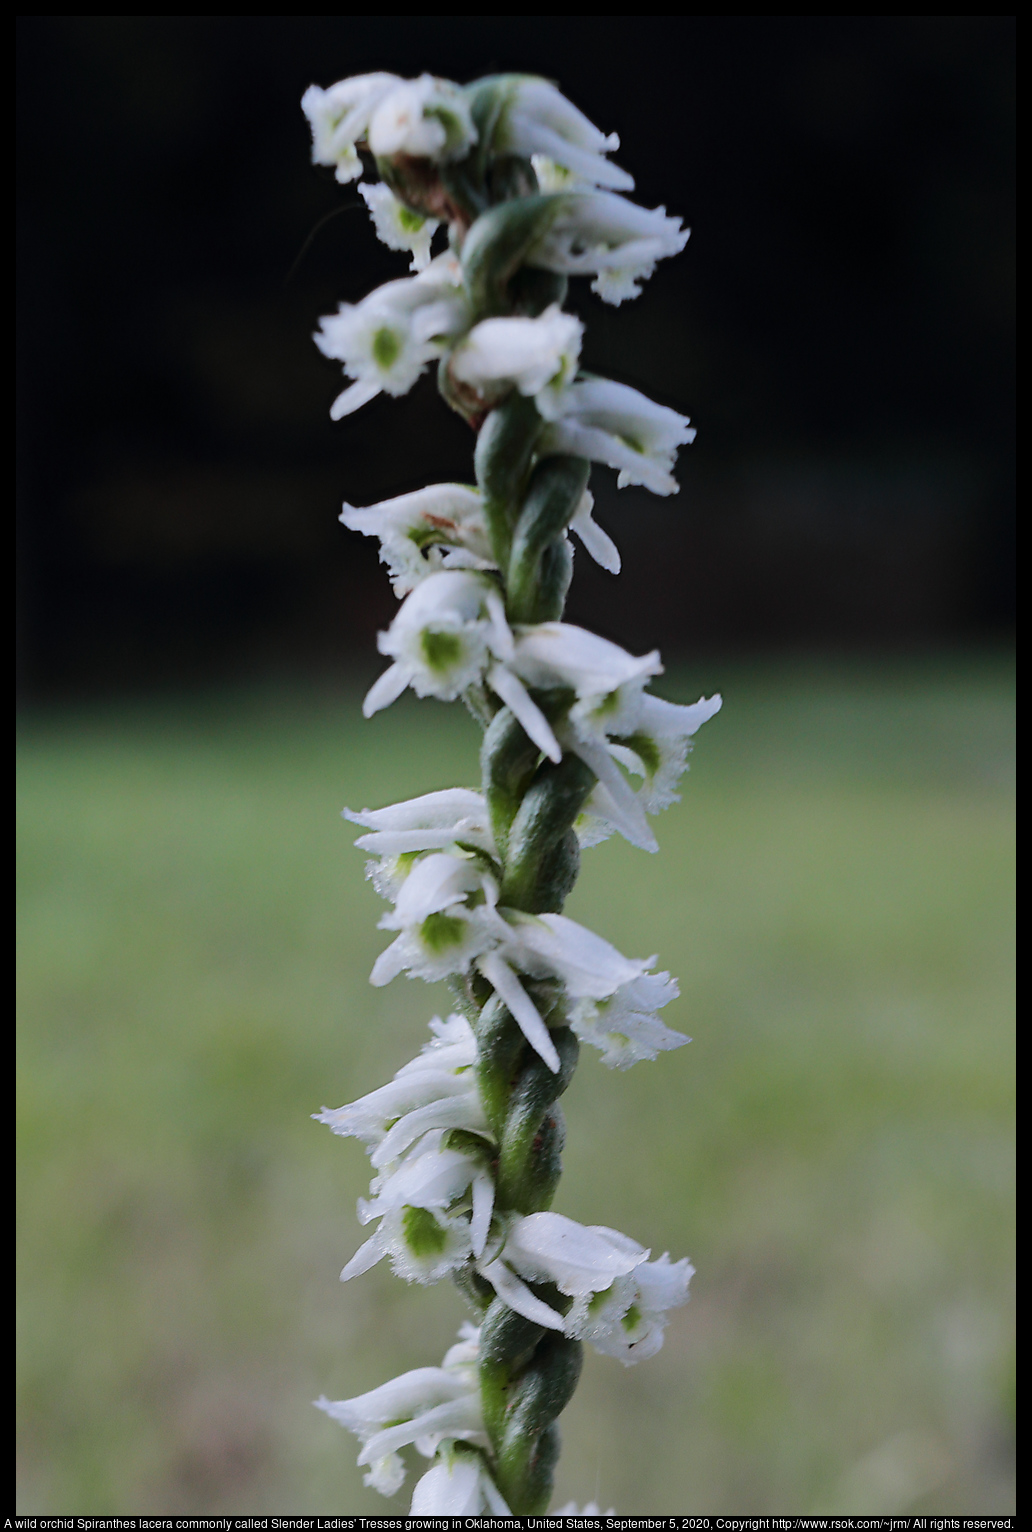 A wild orchid Spiranthes lacera commonly called Slender Ladies's Tresses growing in Oklahoma, United States, September 5, 2020